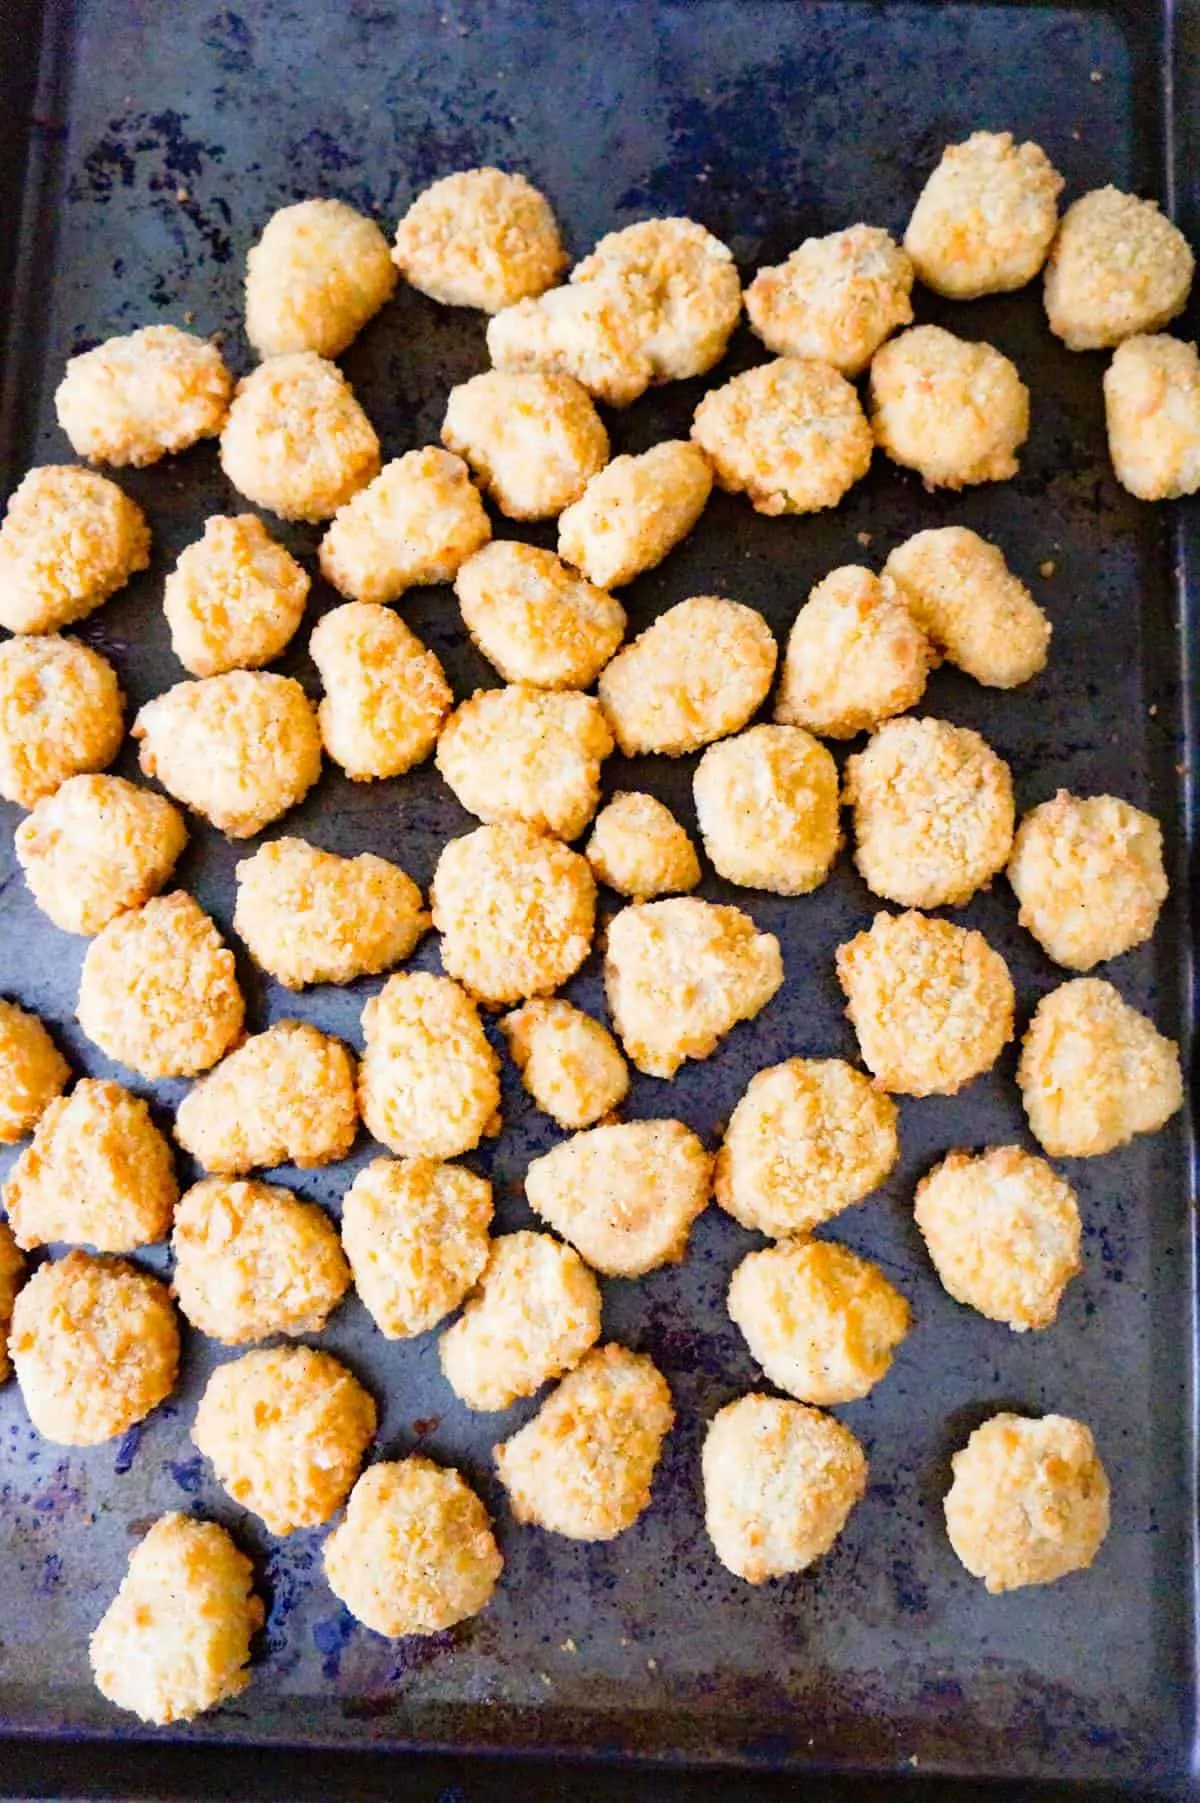 cooked popcorn chicken on a baking sheet